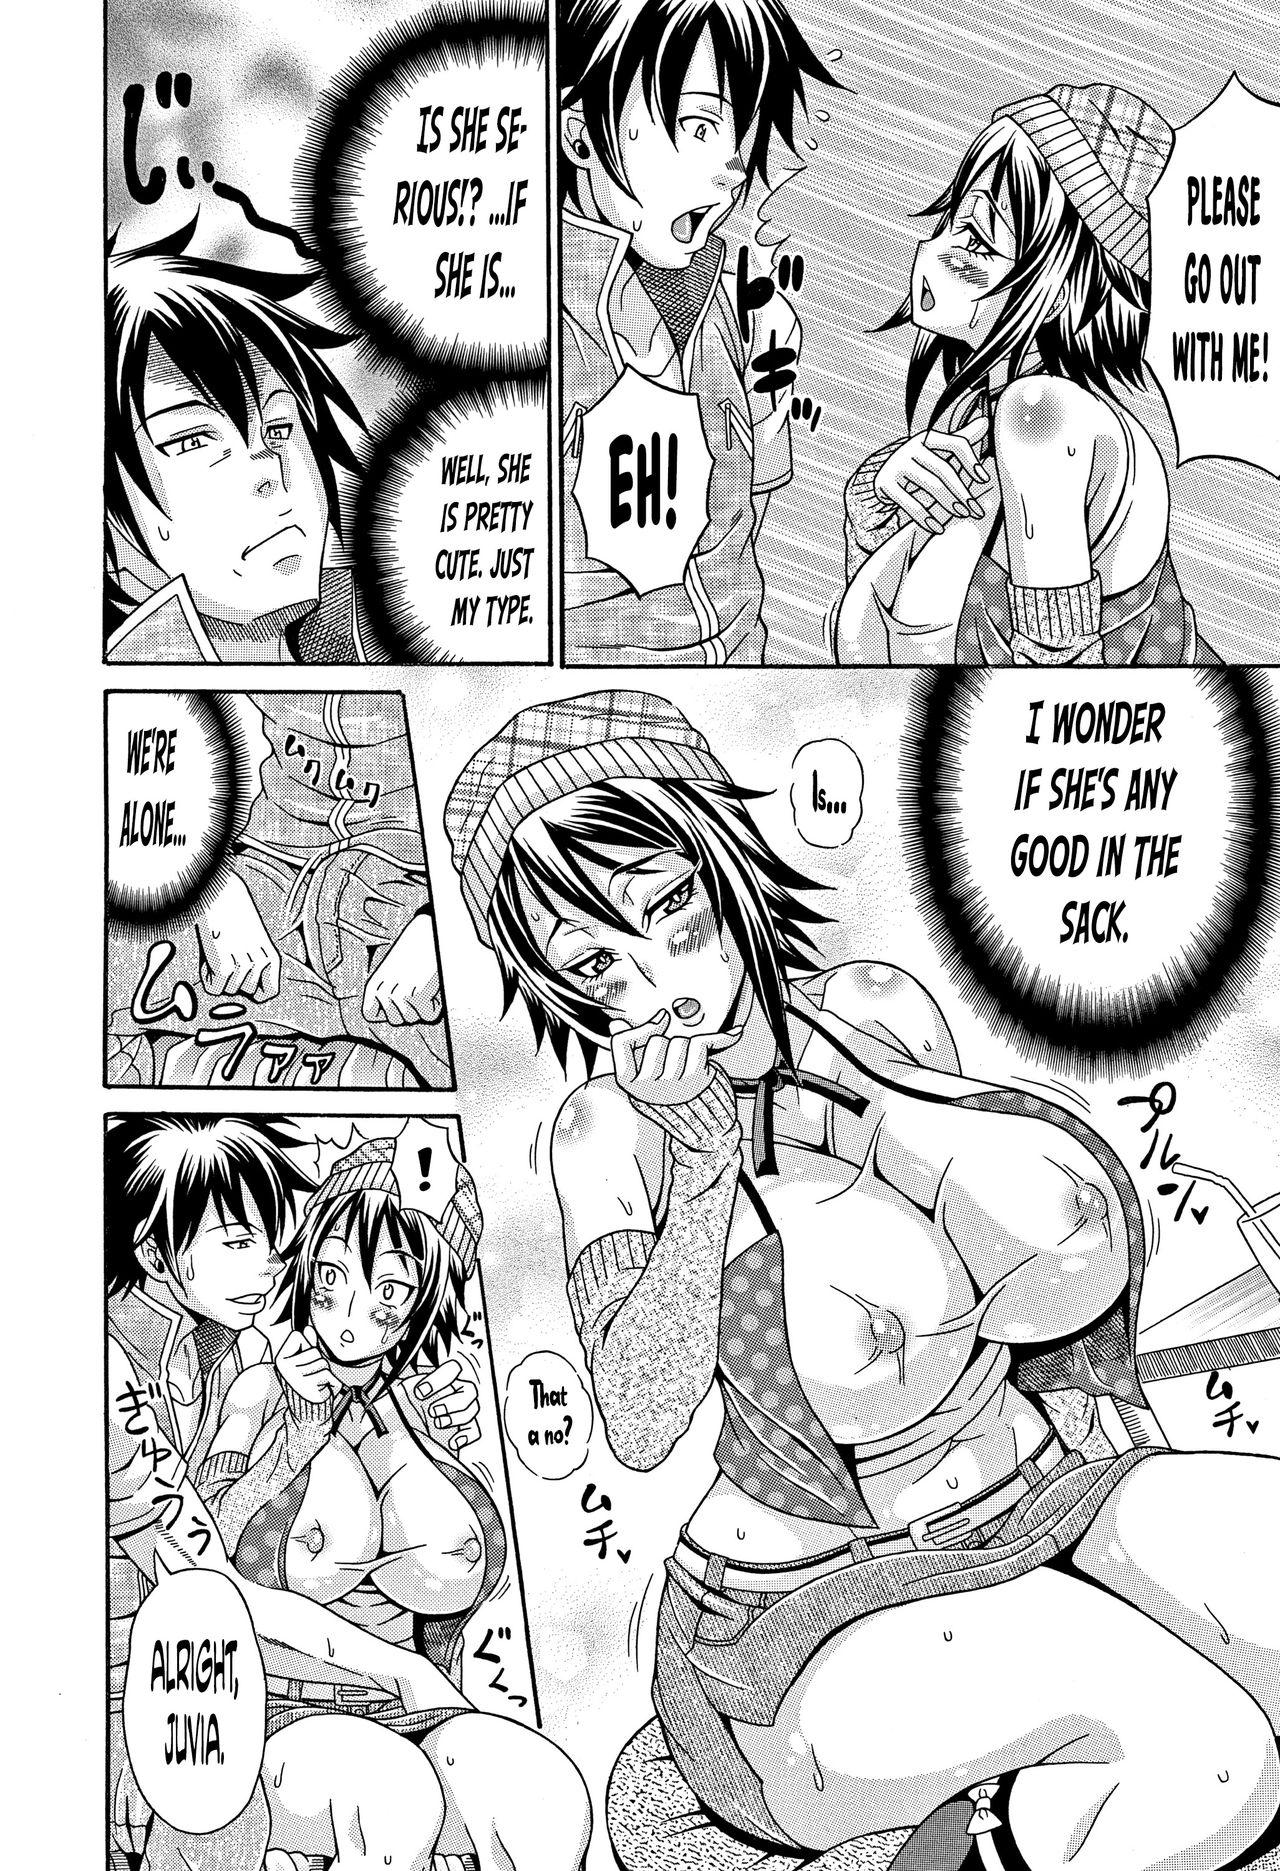 [Andou Hiroyuki] Mamire Chichi - Sticky Tits Feel Hot All Over. Ch.1-8 [English] [doujin-moe.us] 58